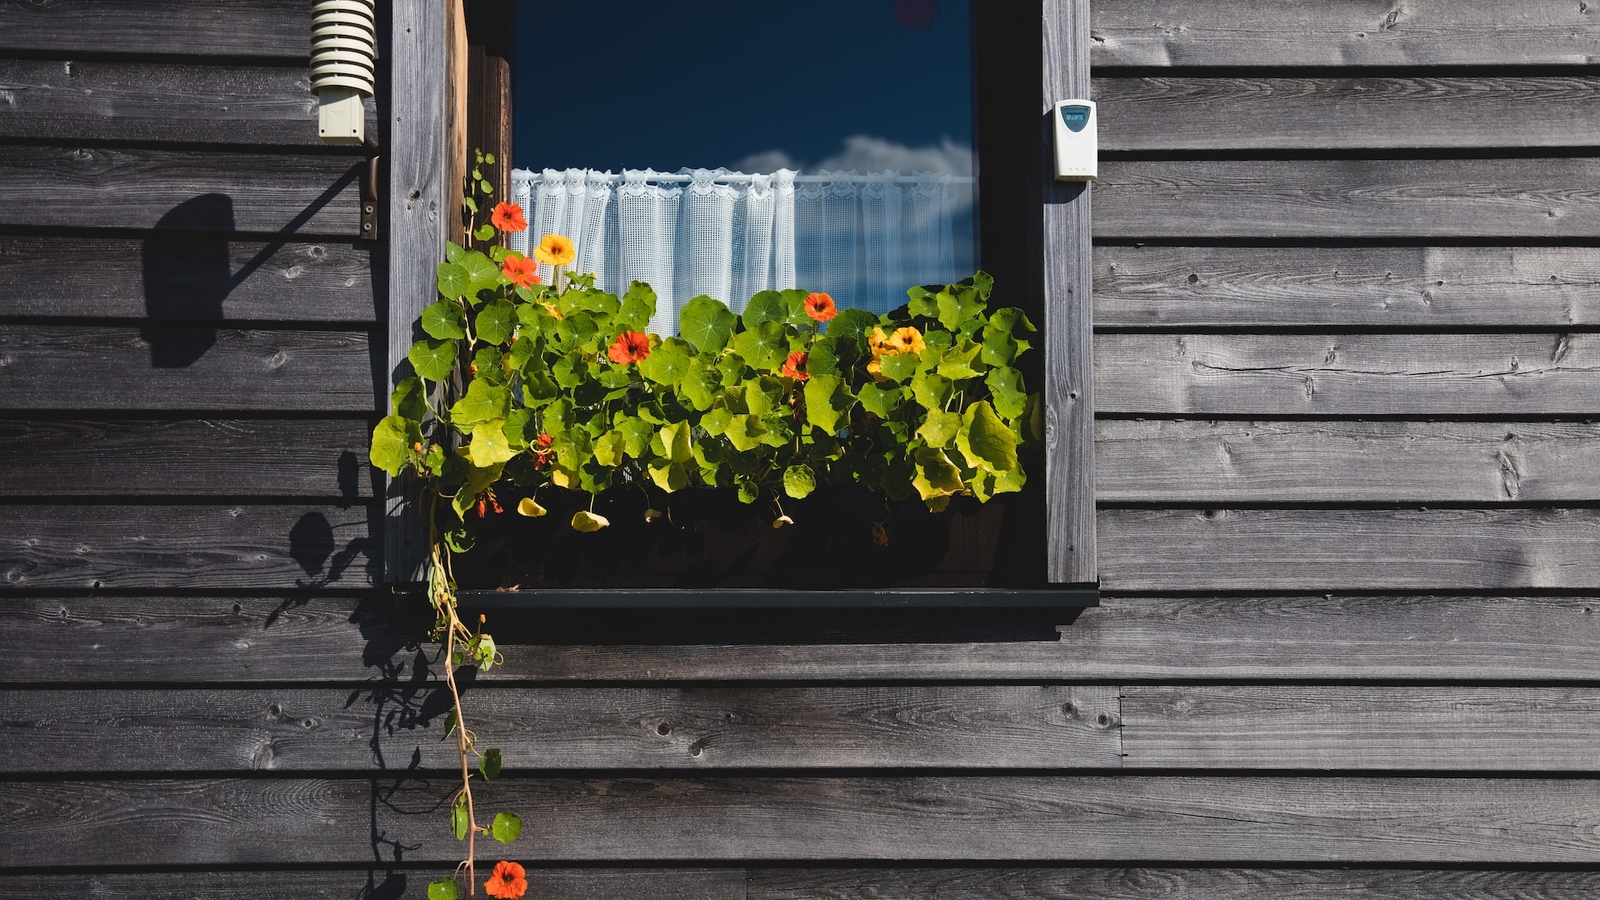 A window box filled with nasturtiums